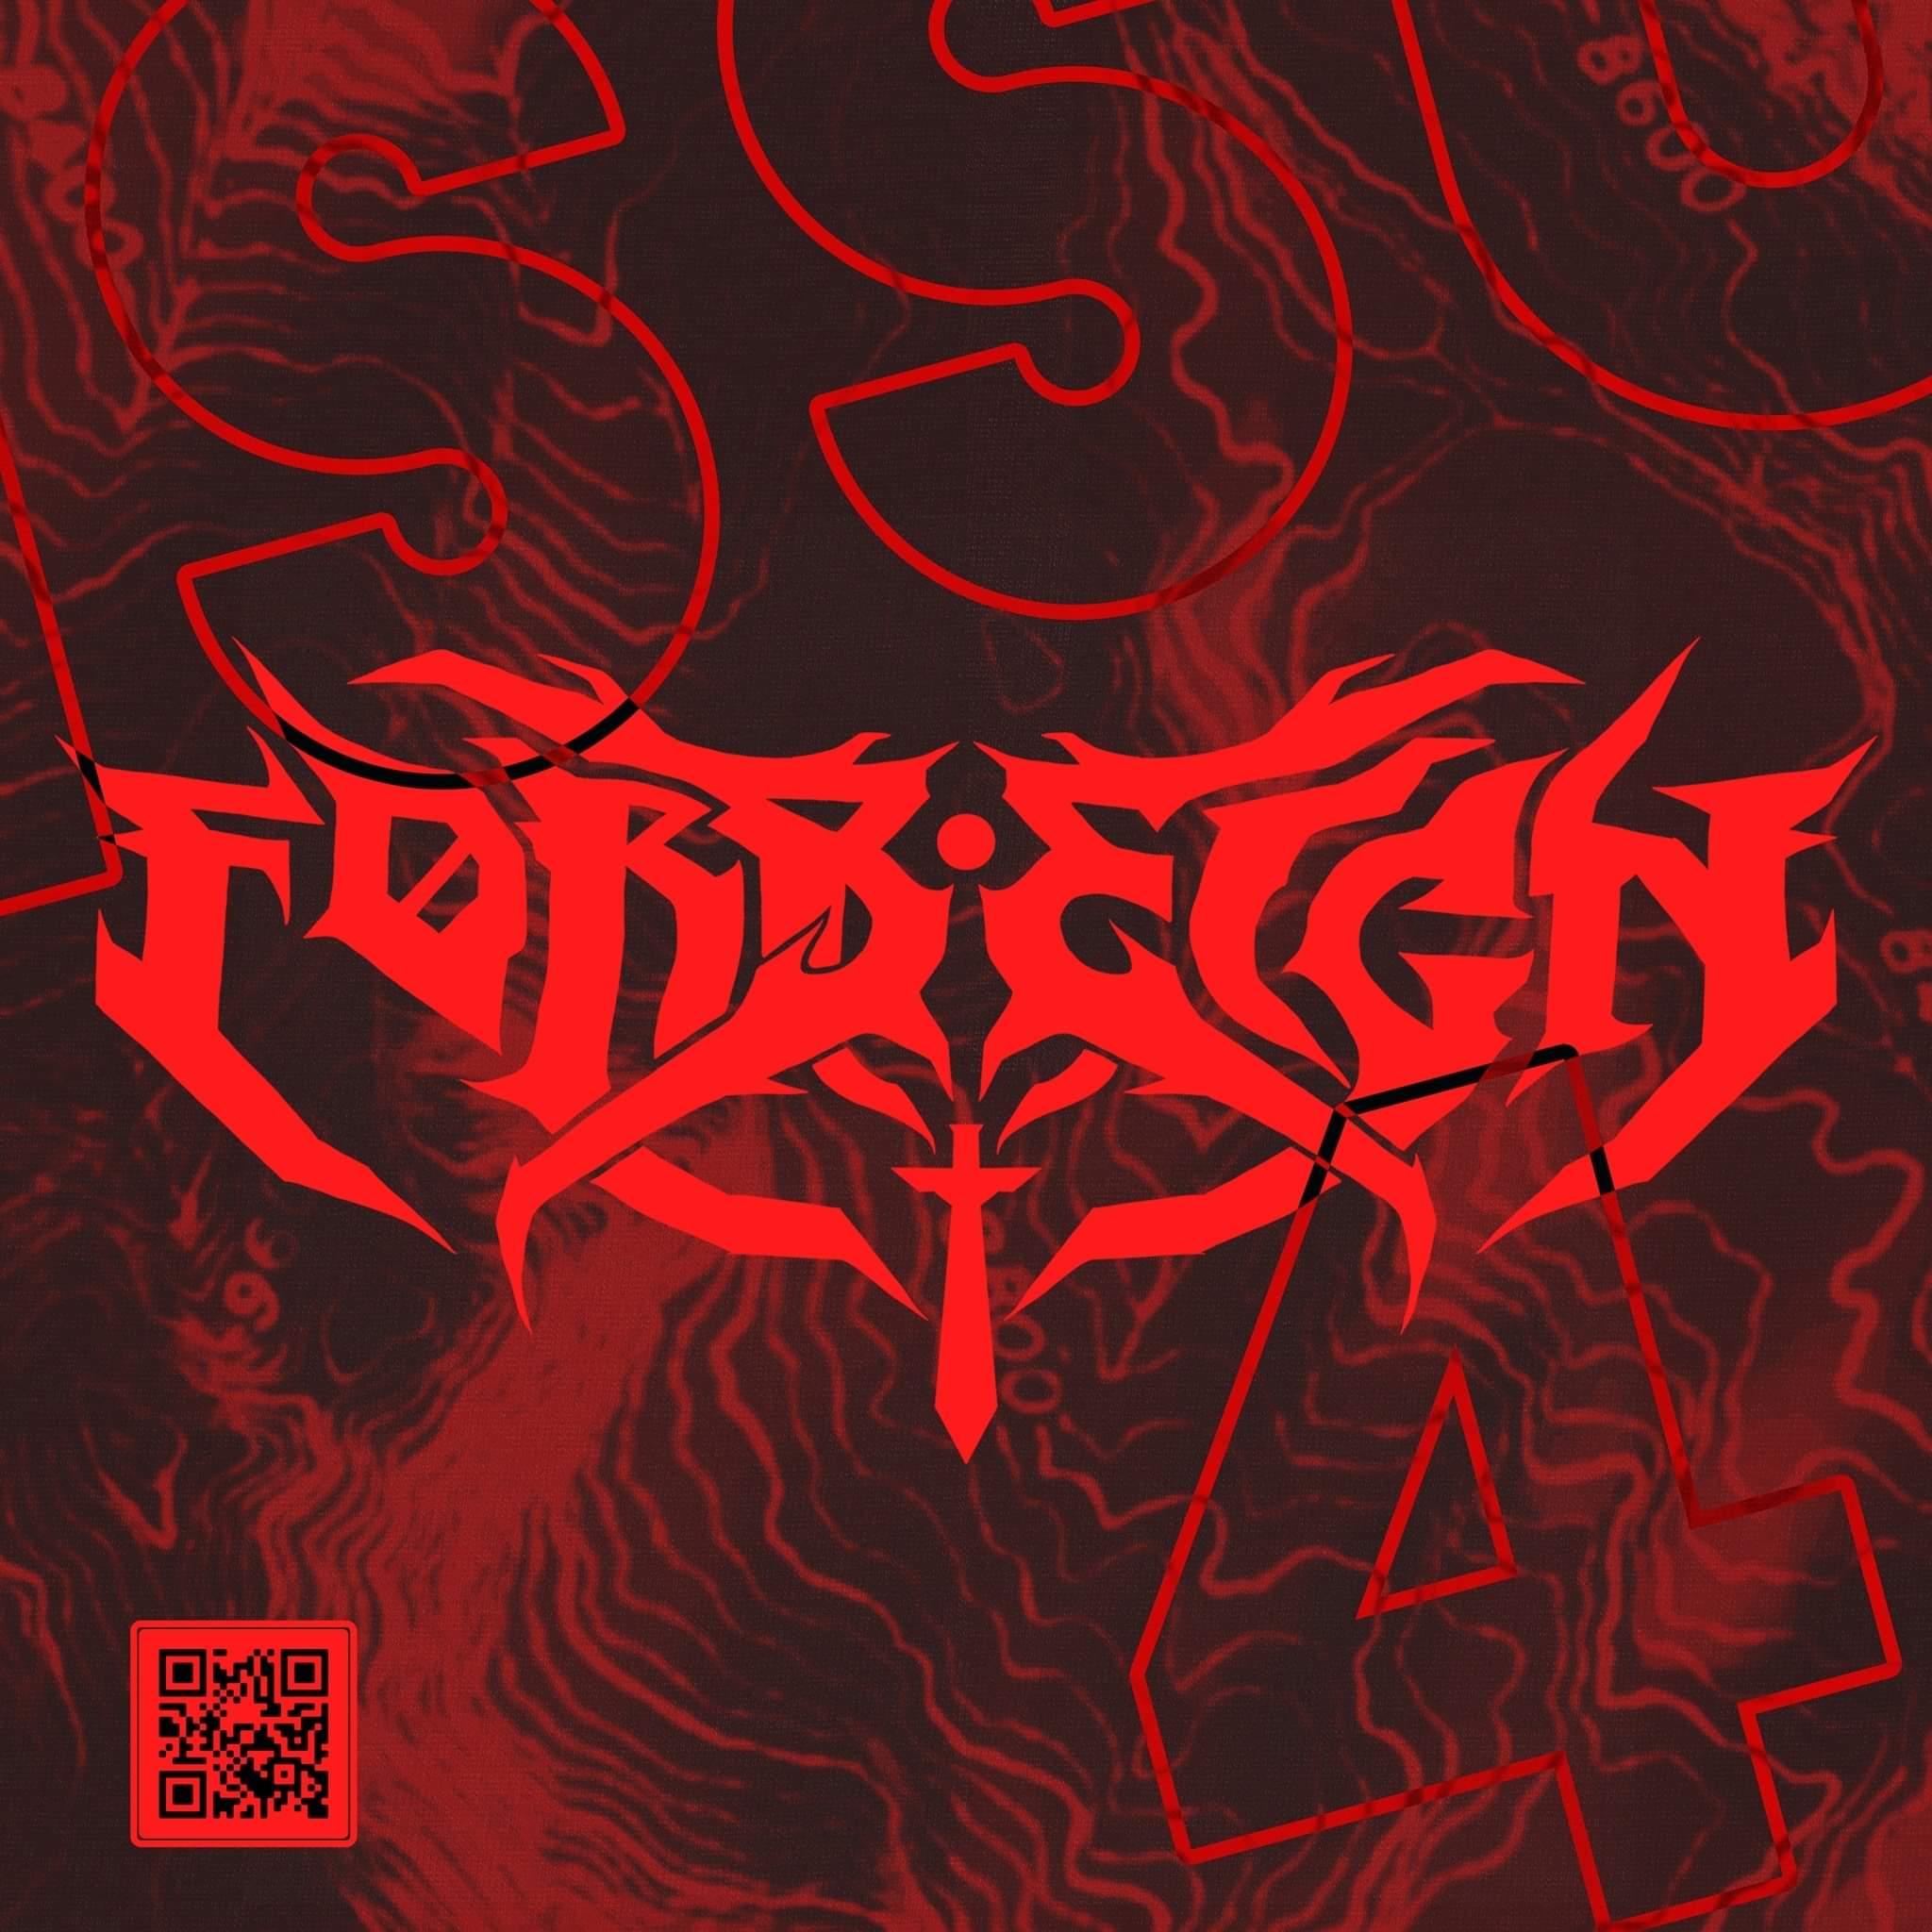 Forreign